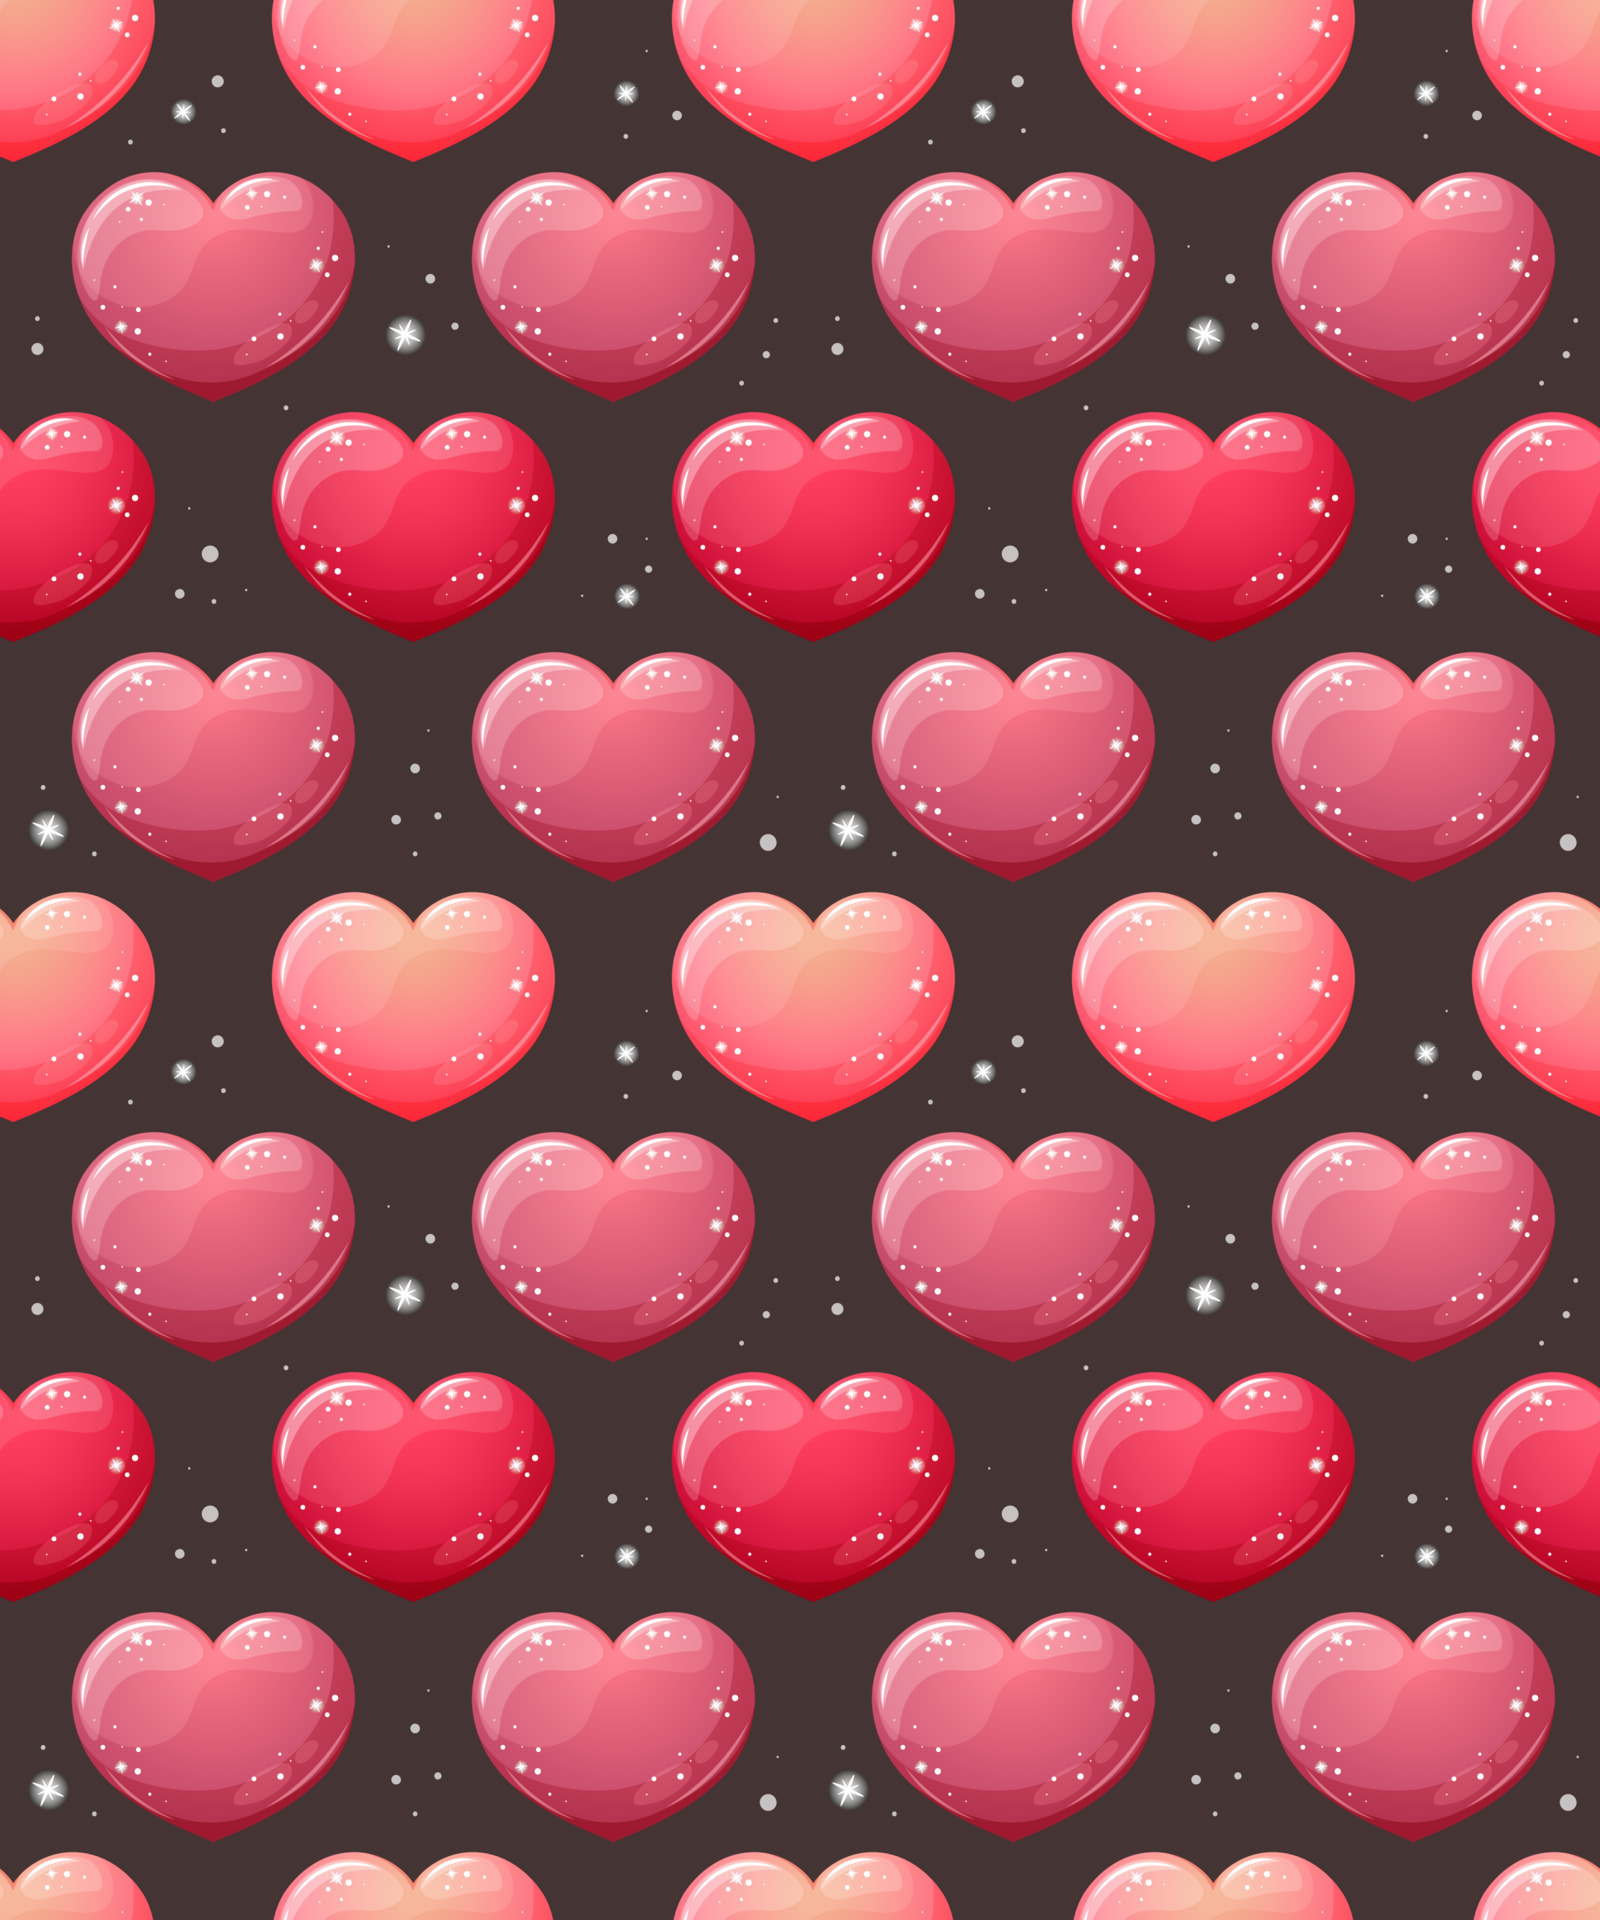 Download A Colorful Emoji Puzzle With Hearts And Emojis Wallpaper   Wallpaperscom